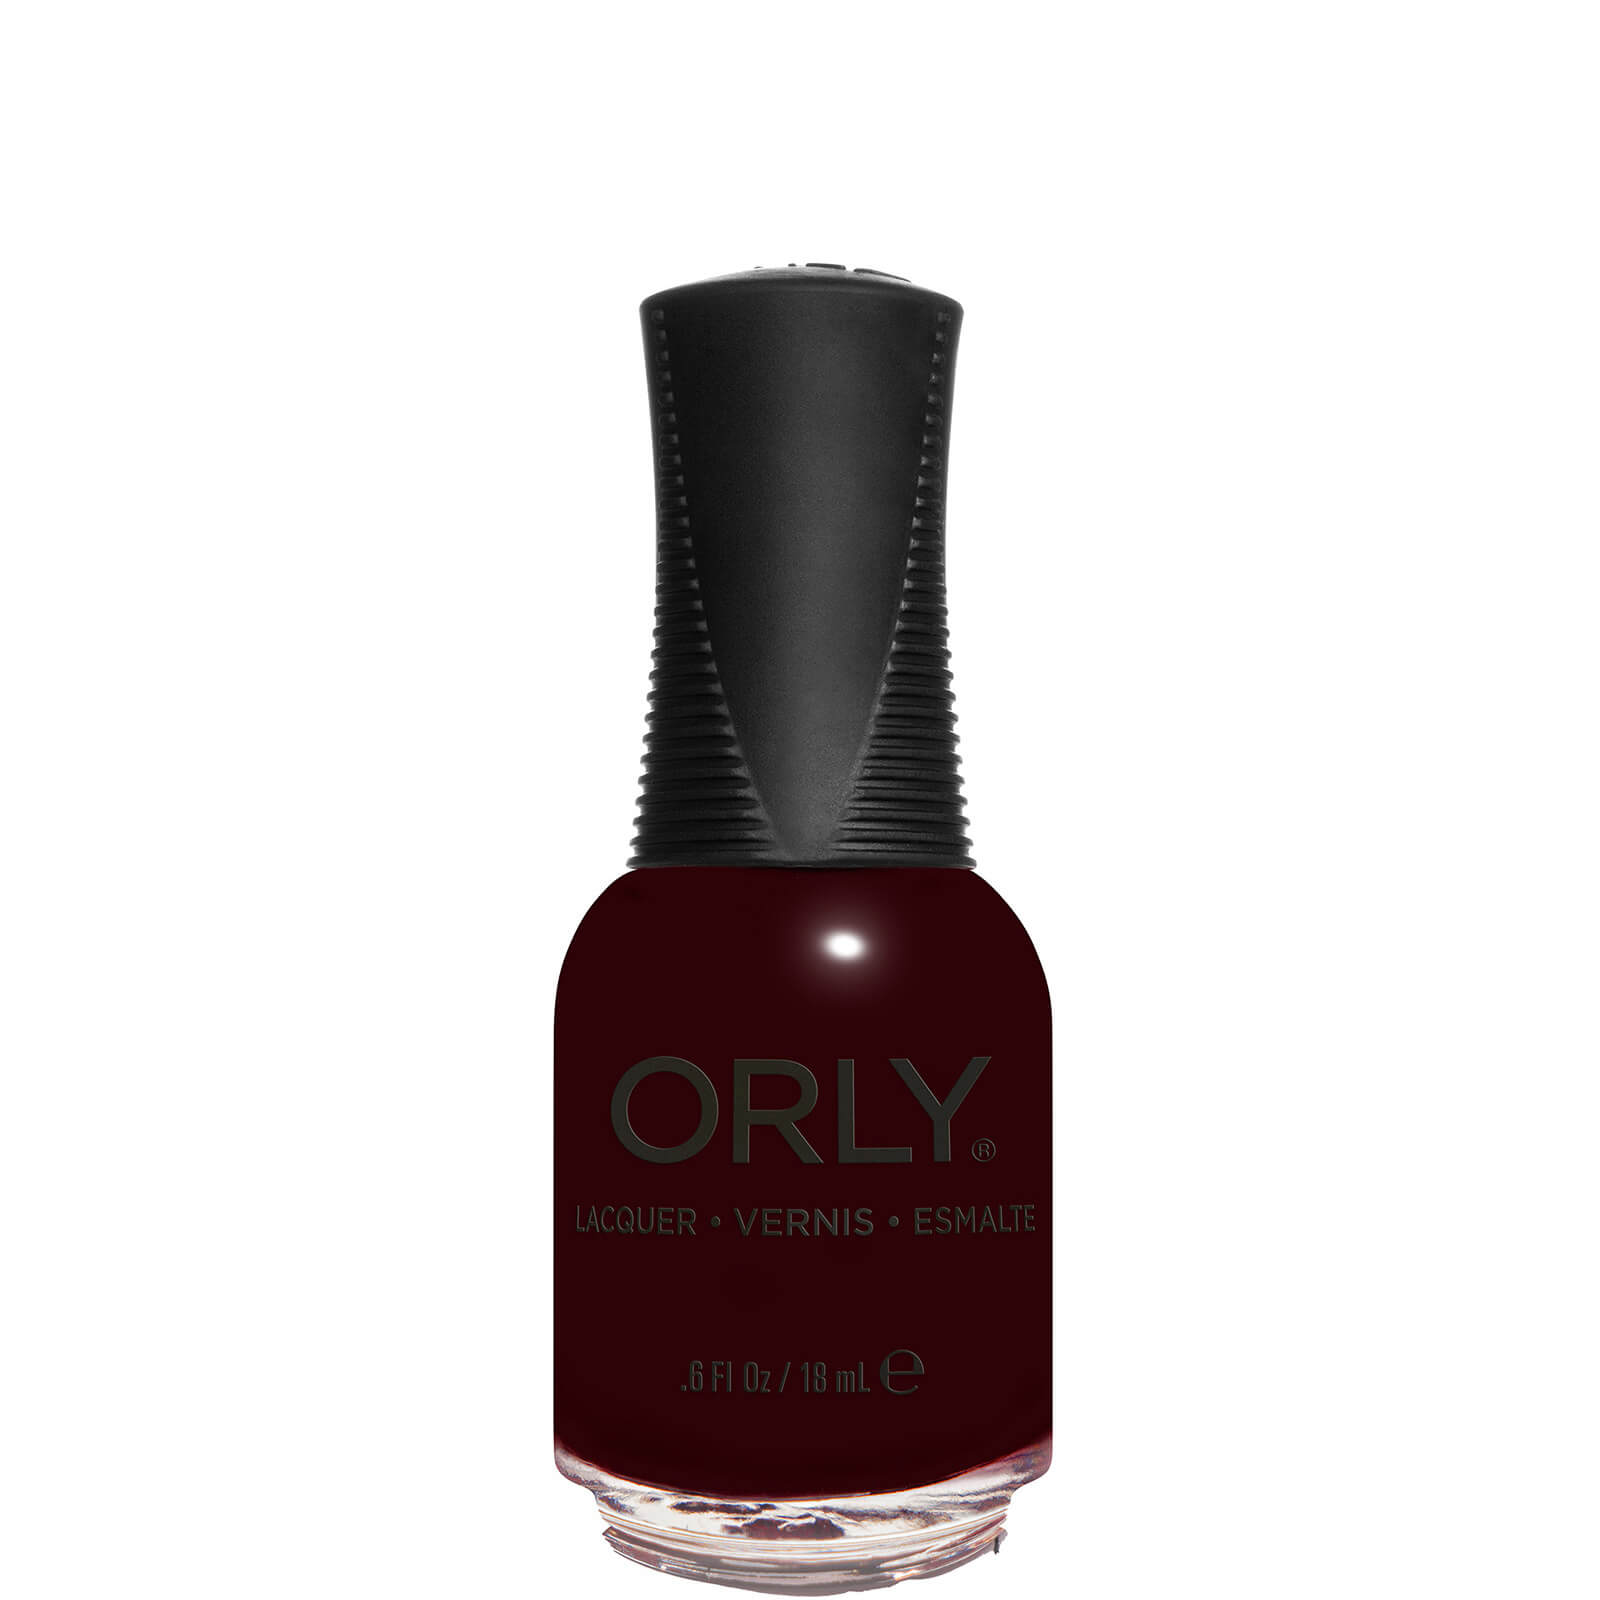 ORLY Opulent Obsession (18ml)